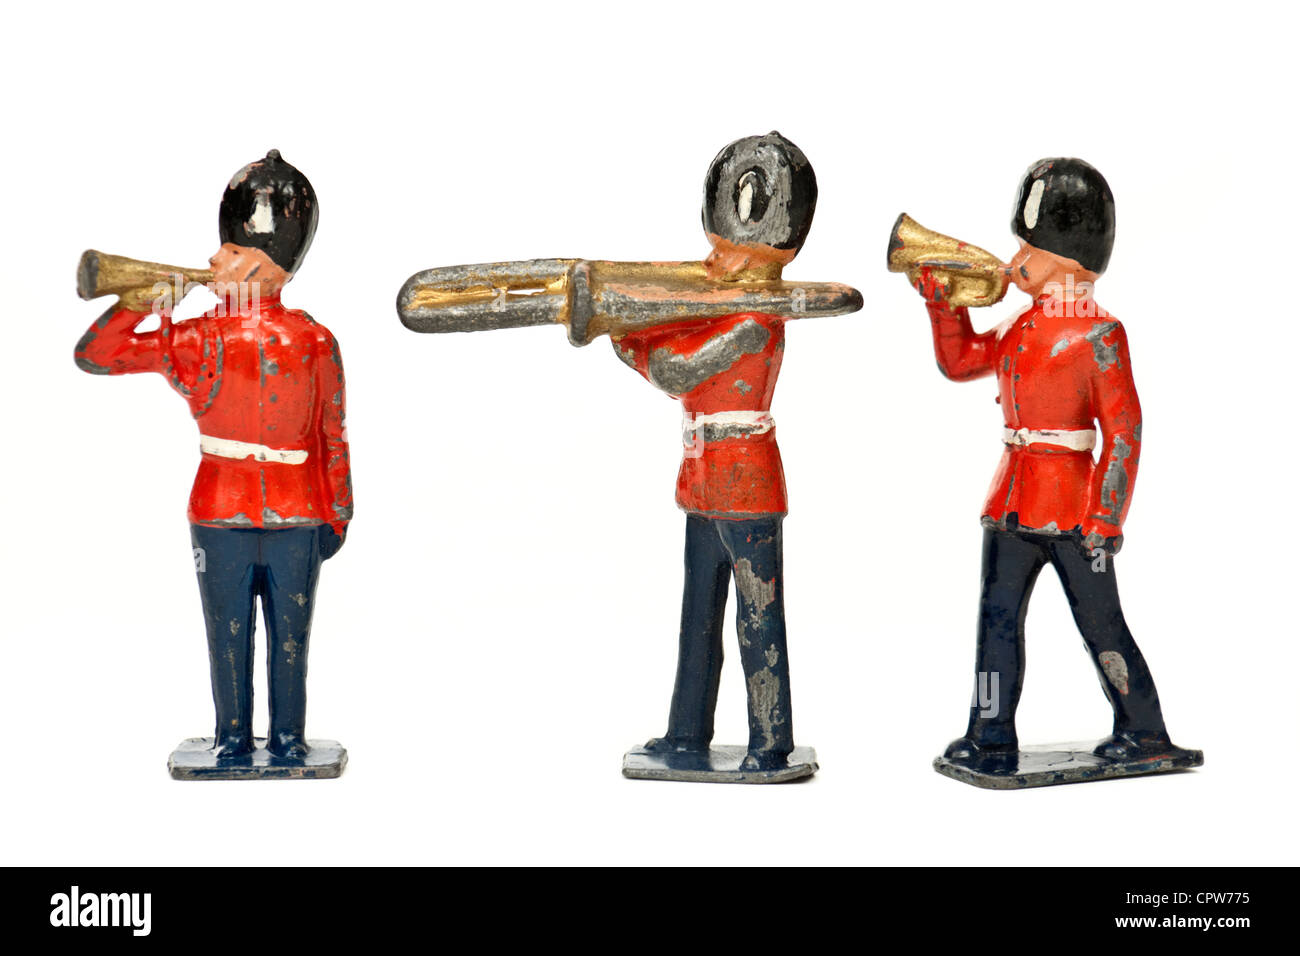 Vintage military brass band lead toy soldiers Stock Photo